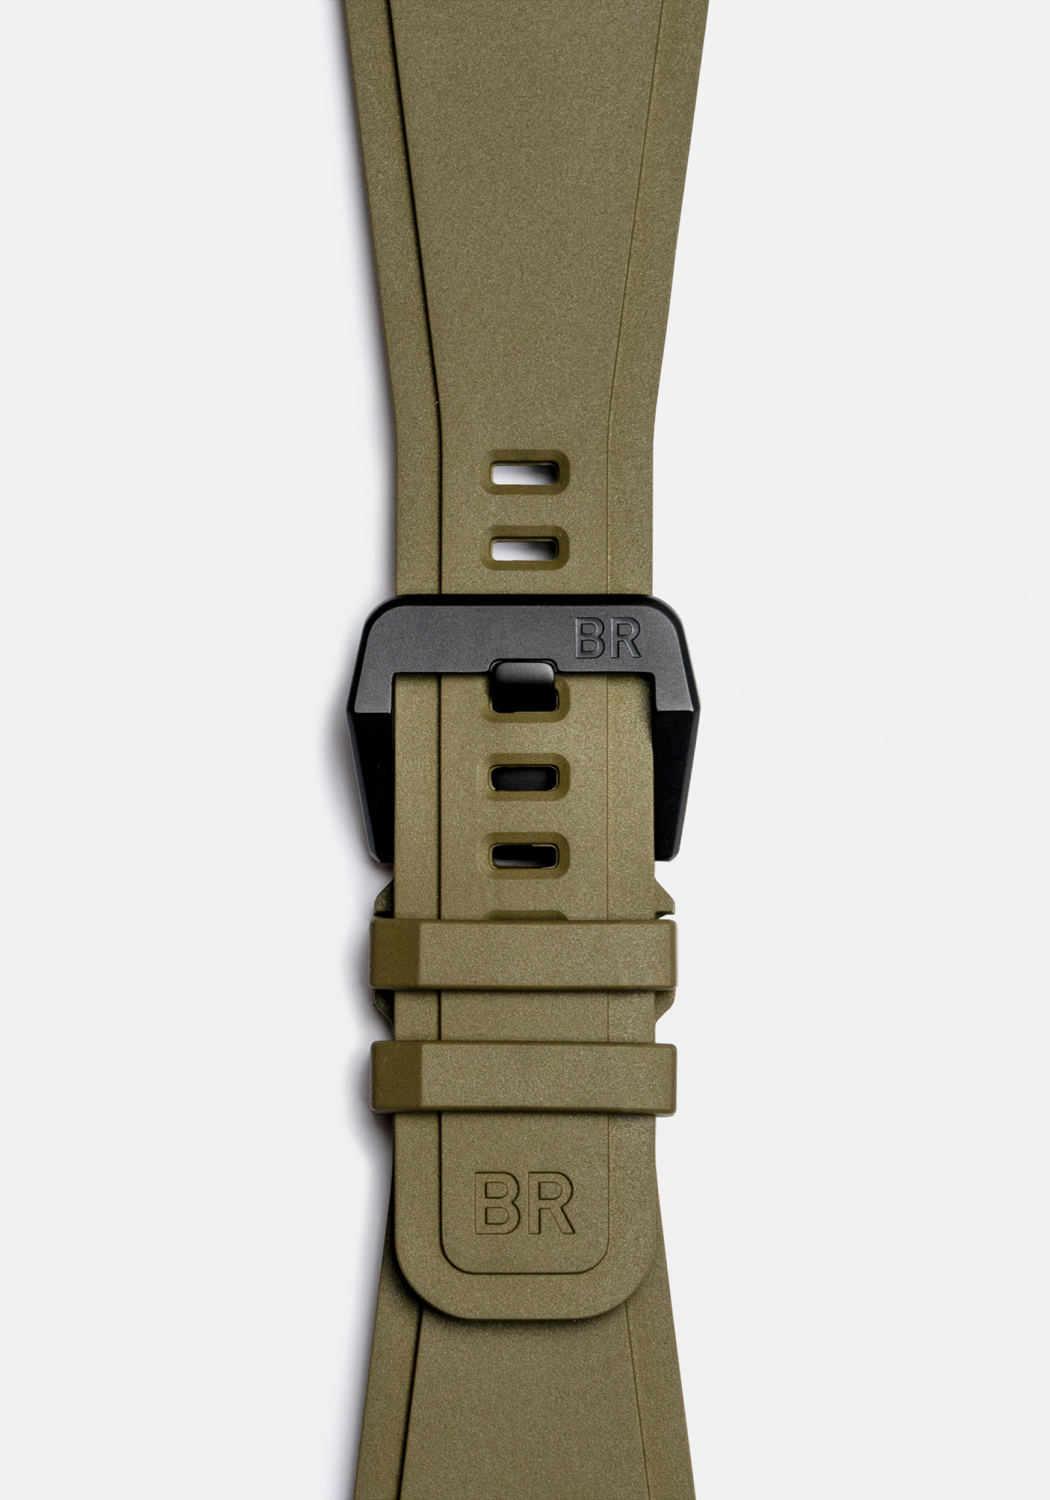 Strap of the Bell & Ross New BR 03 Military Ceramic on the wrist | OsterJewelers.com